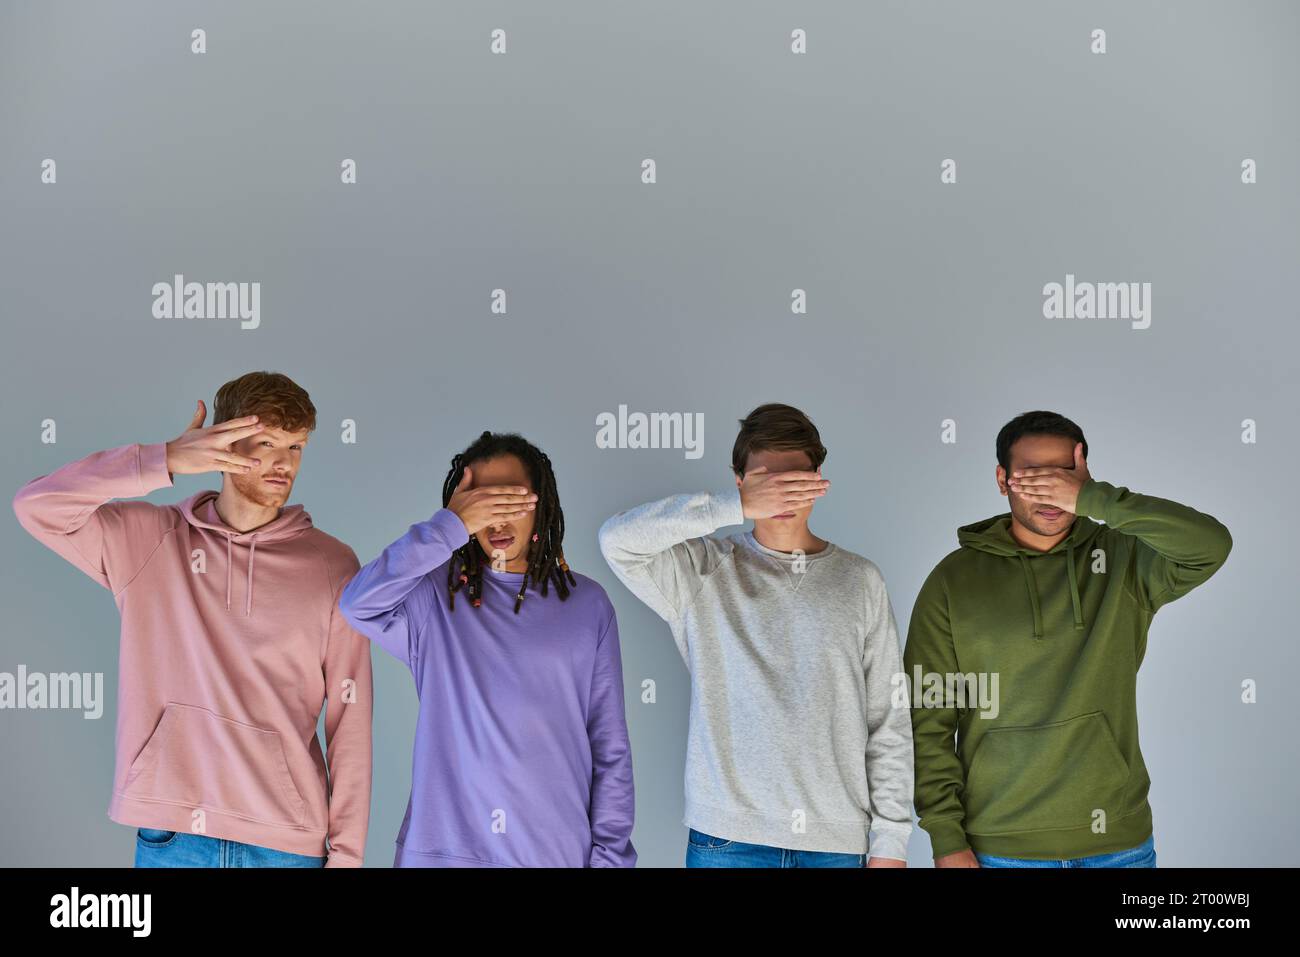 multicultural friends in urban wear closing eyes with palms one peeking looking at camera, diversity Stock Photo